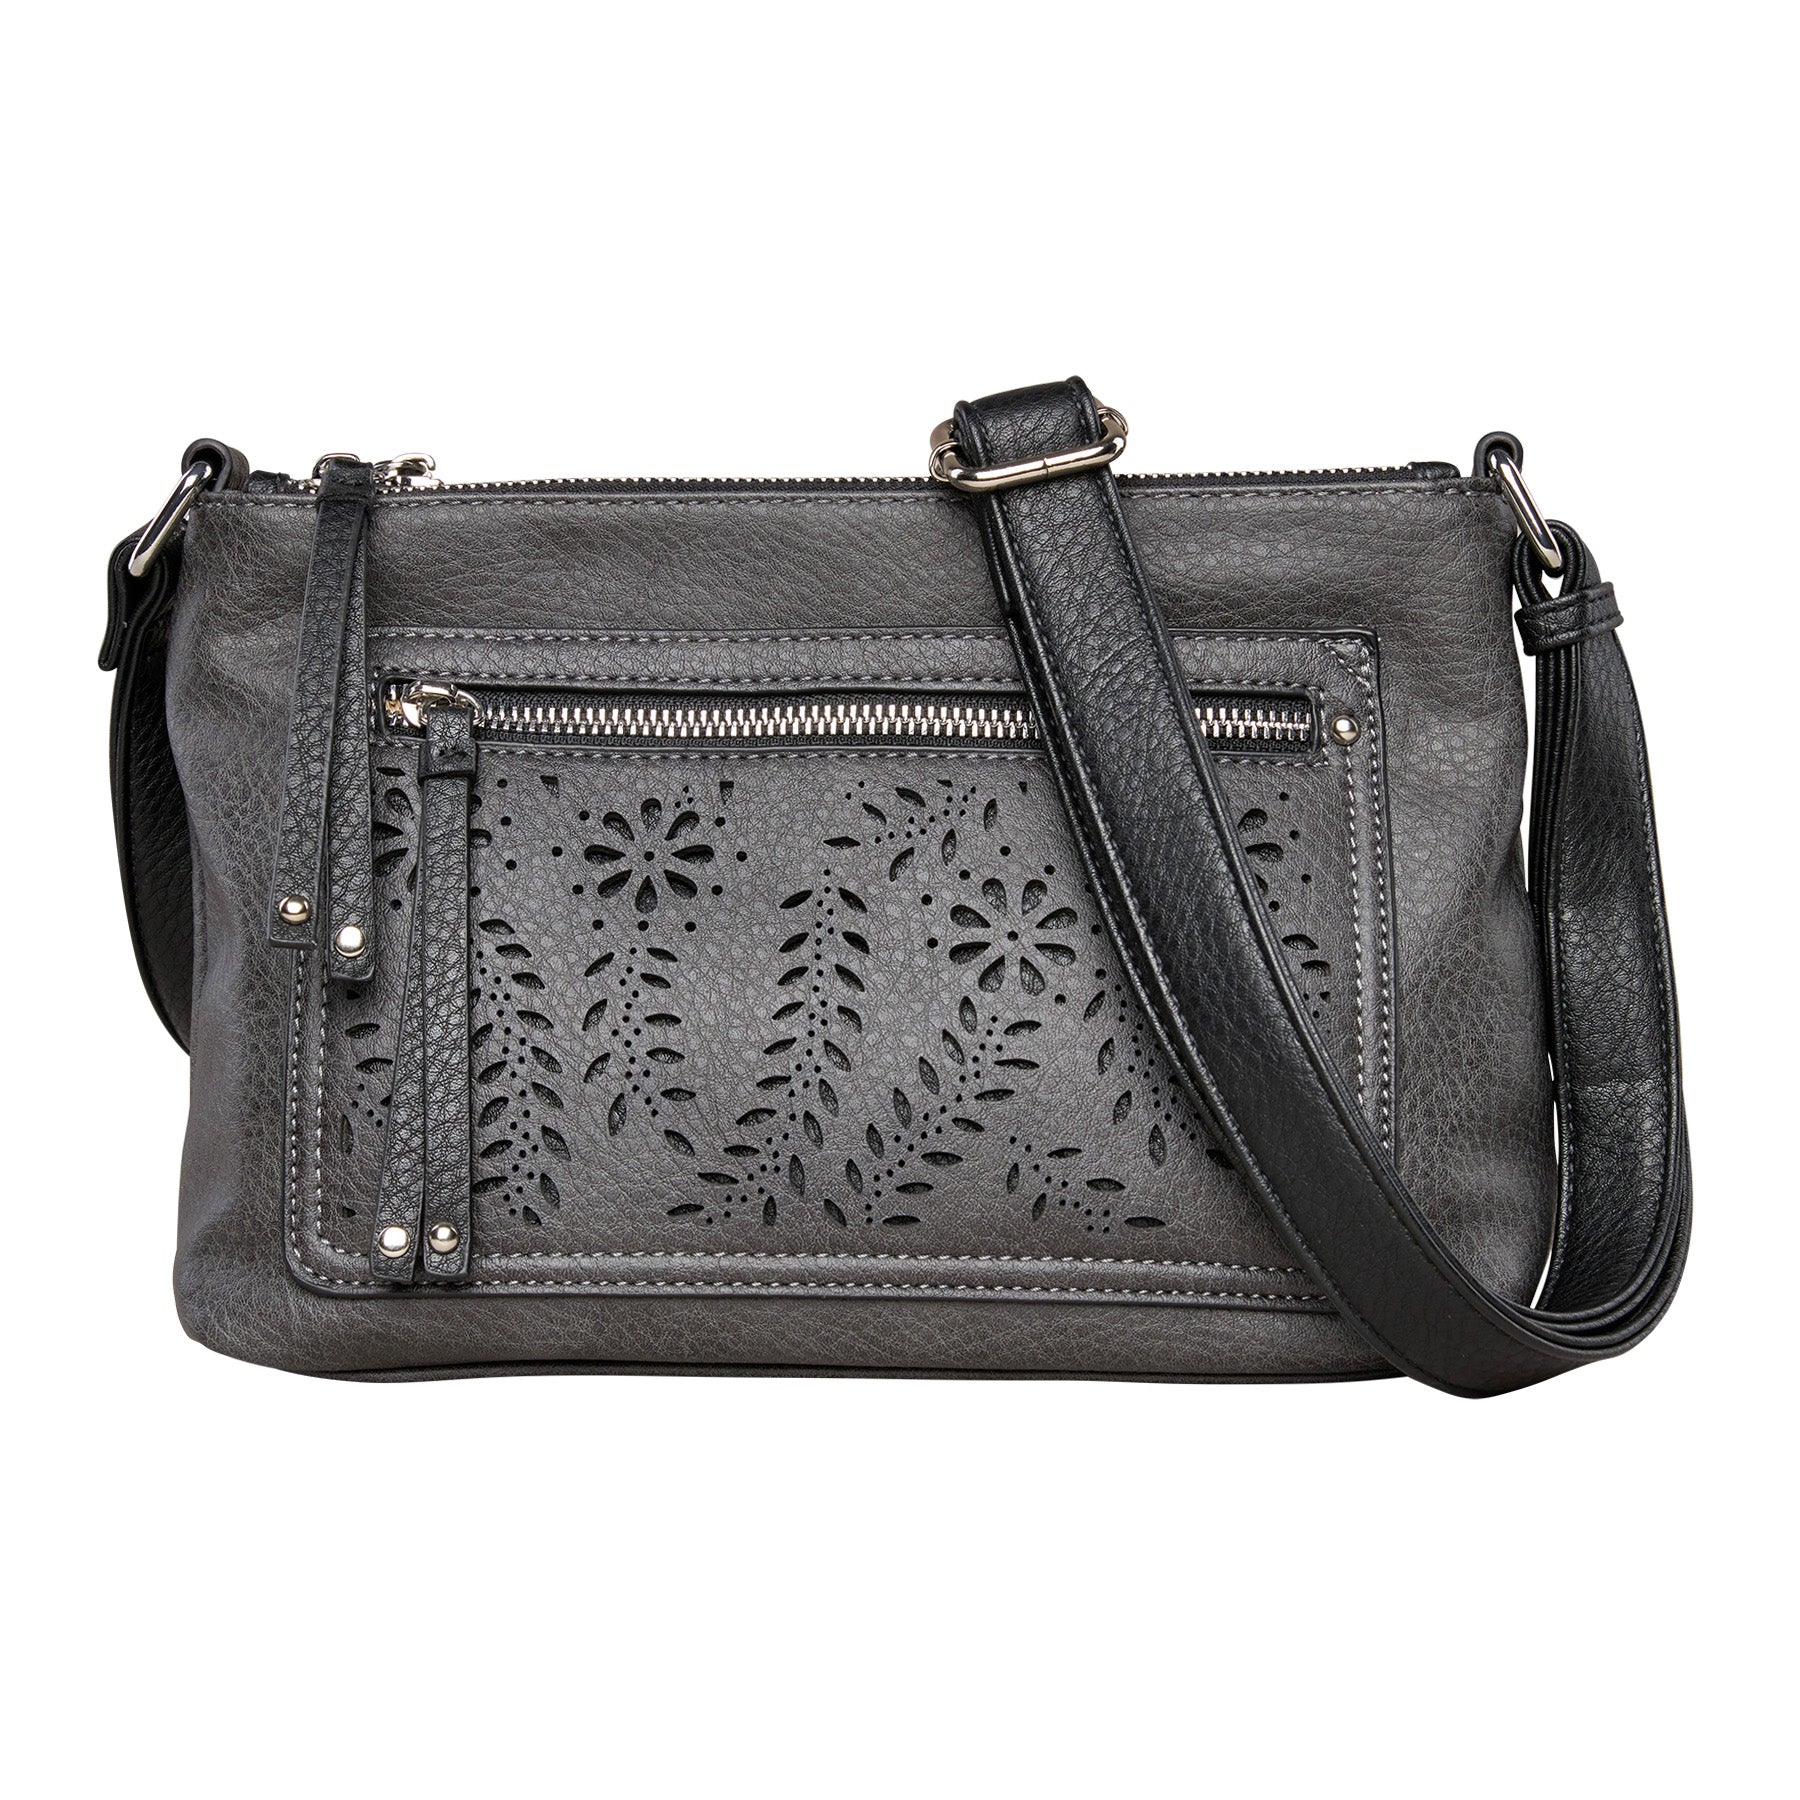 Hailey Concealed Carry Crossbody